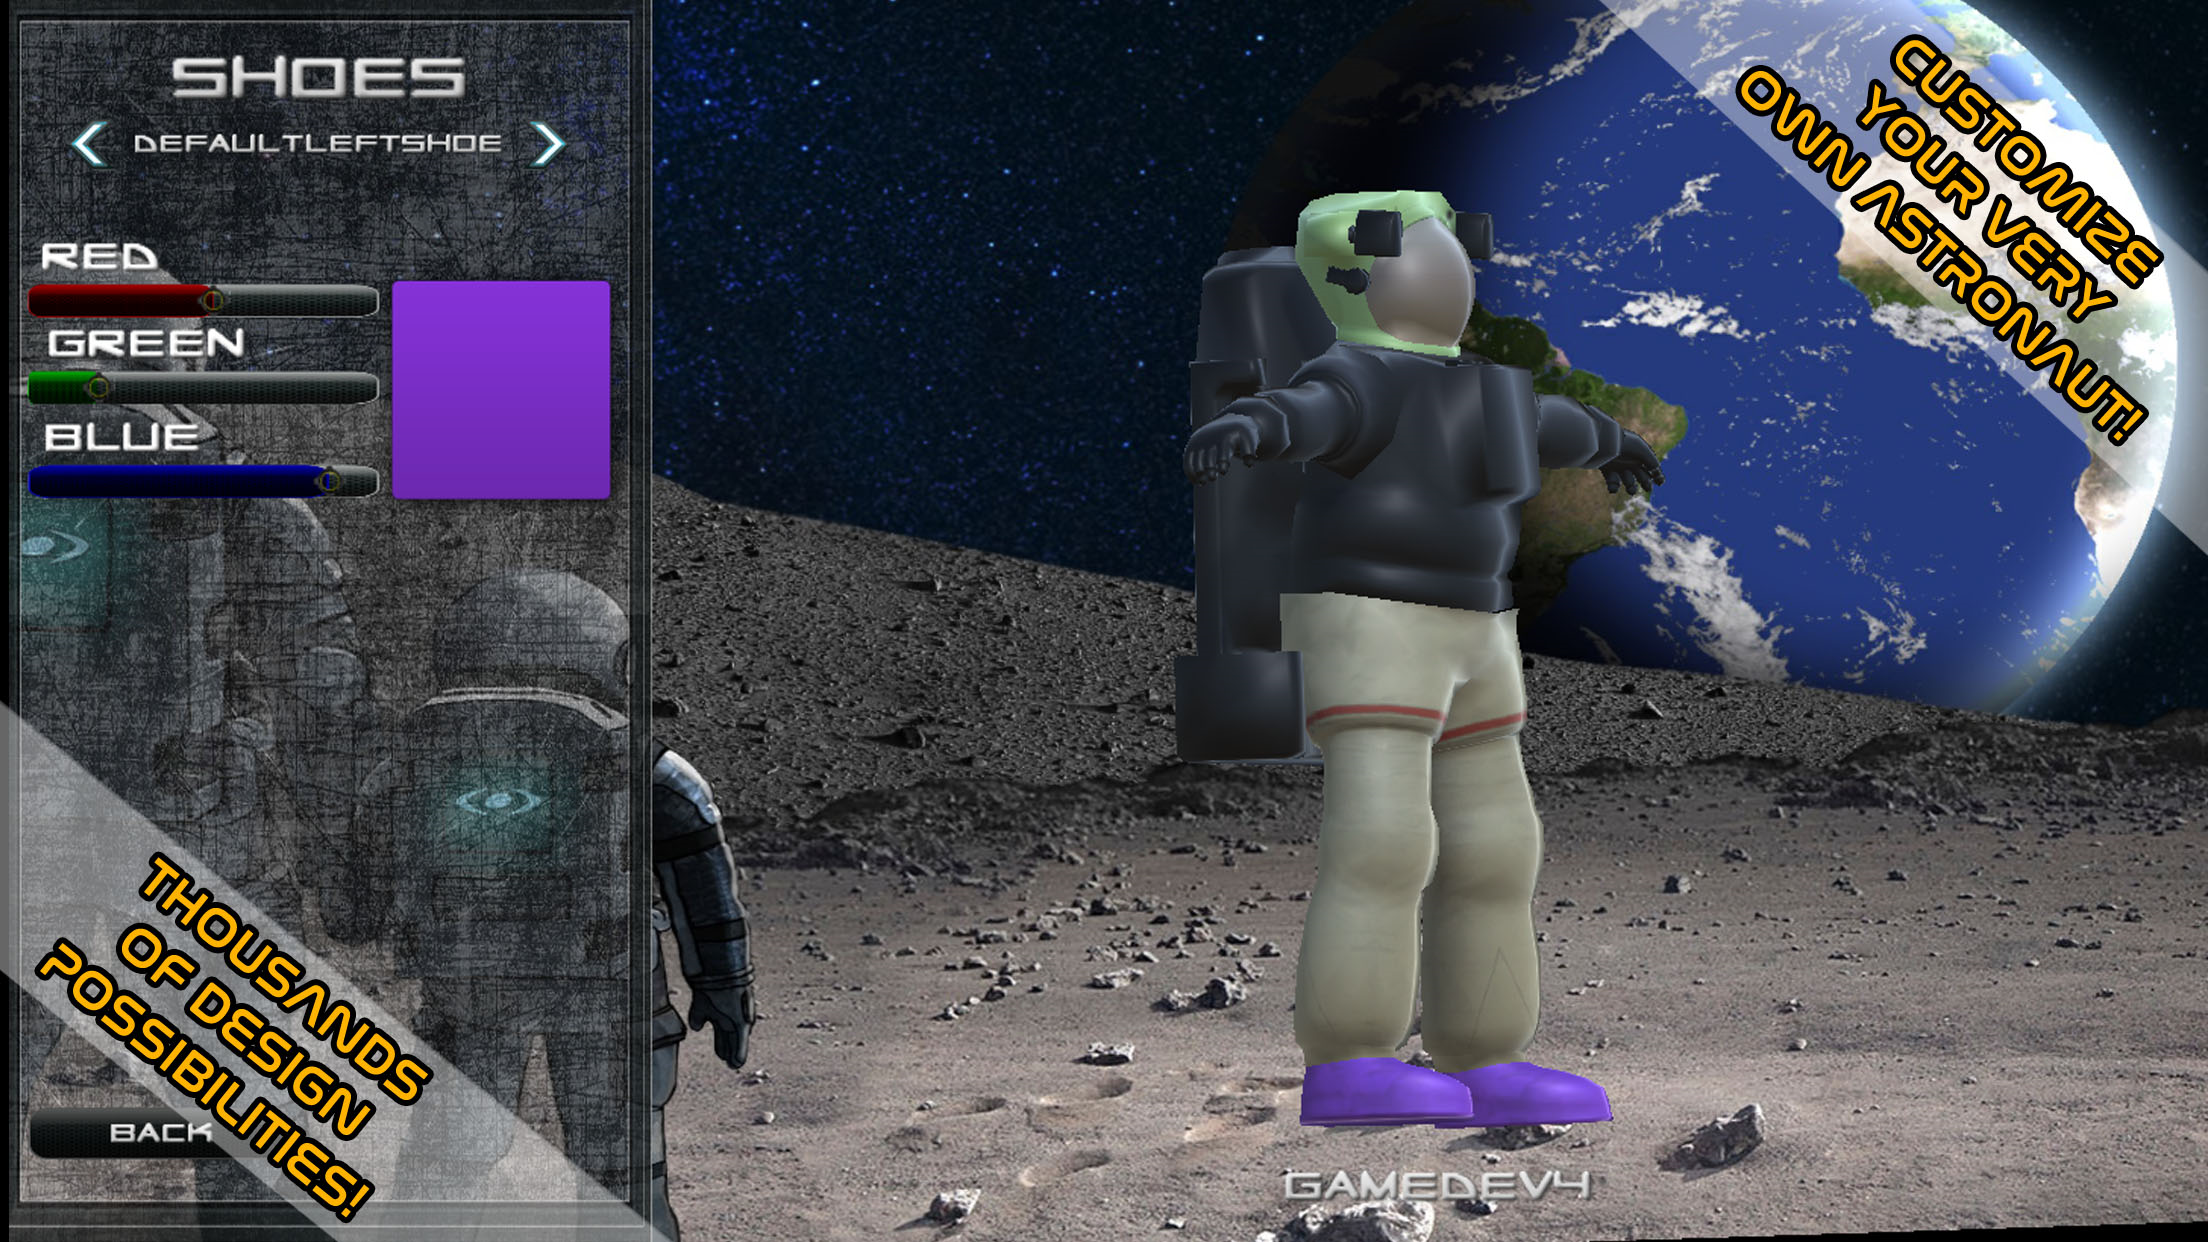 Intergalactic Education e learning STEM screenshot gameplay aligns with Common Core standards